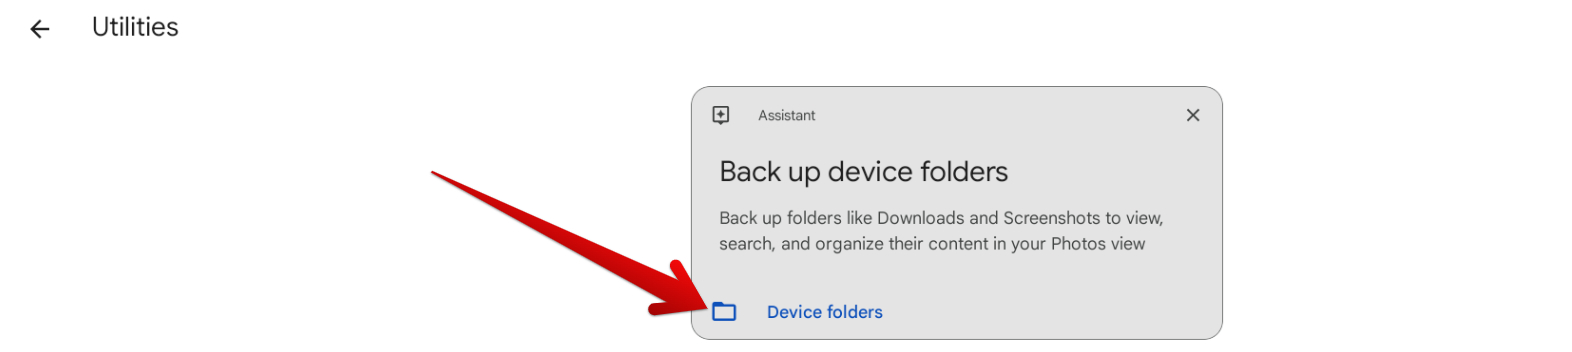 Clicking on "Device folders" next